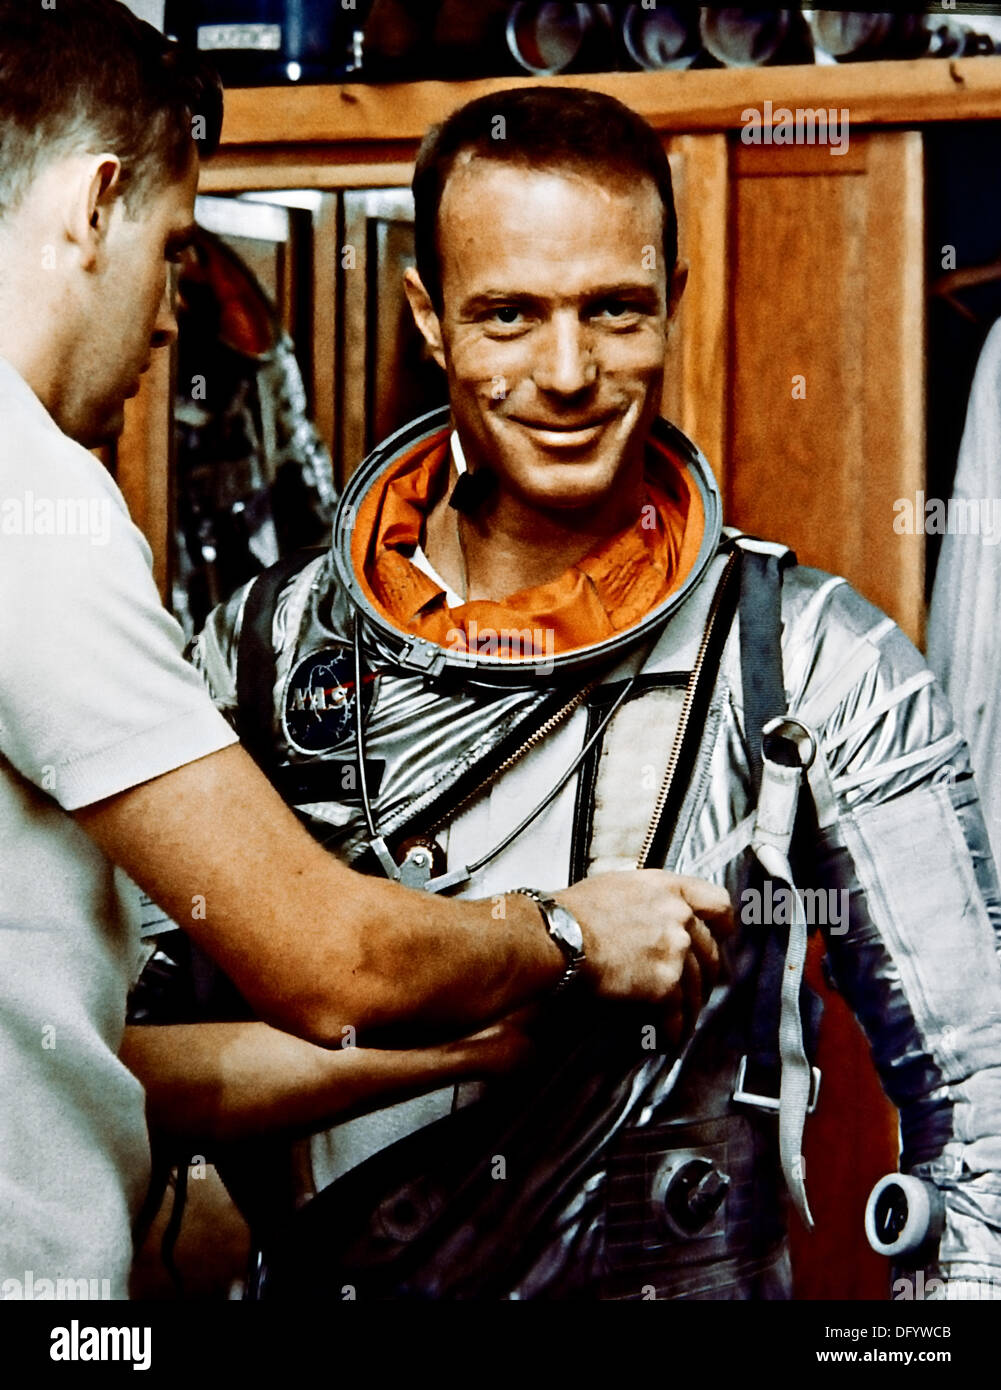 NASA Astronaut Scott Carpenter Astronaut Scott Carpenter, prime pilot for the Mercury-Atlas 7 flight, is seen in Hanger S crew quarters during a suiting exercise May 22, 1962 in Cape Canaveral, FL. Carpenter one of the original Mercury Seven astronauts and the second American to orbit the Earth died October 10, 2013 at age 88. Stock Photo